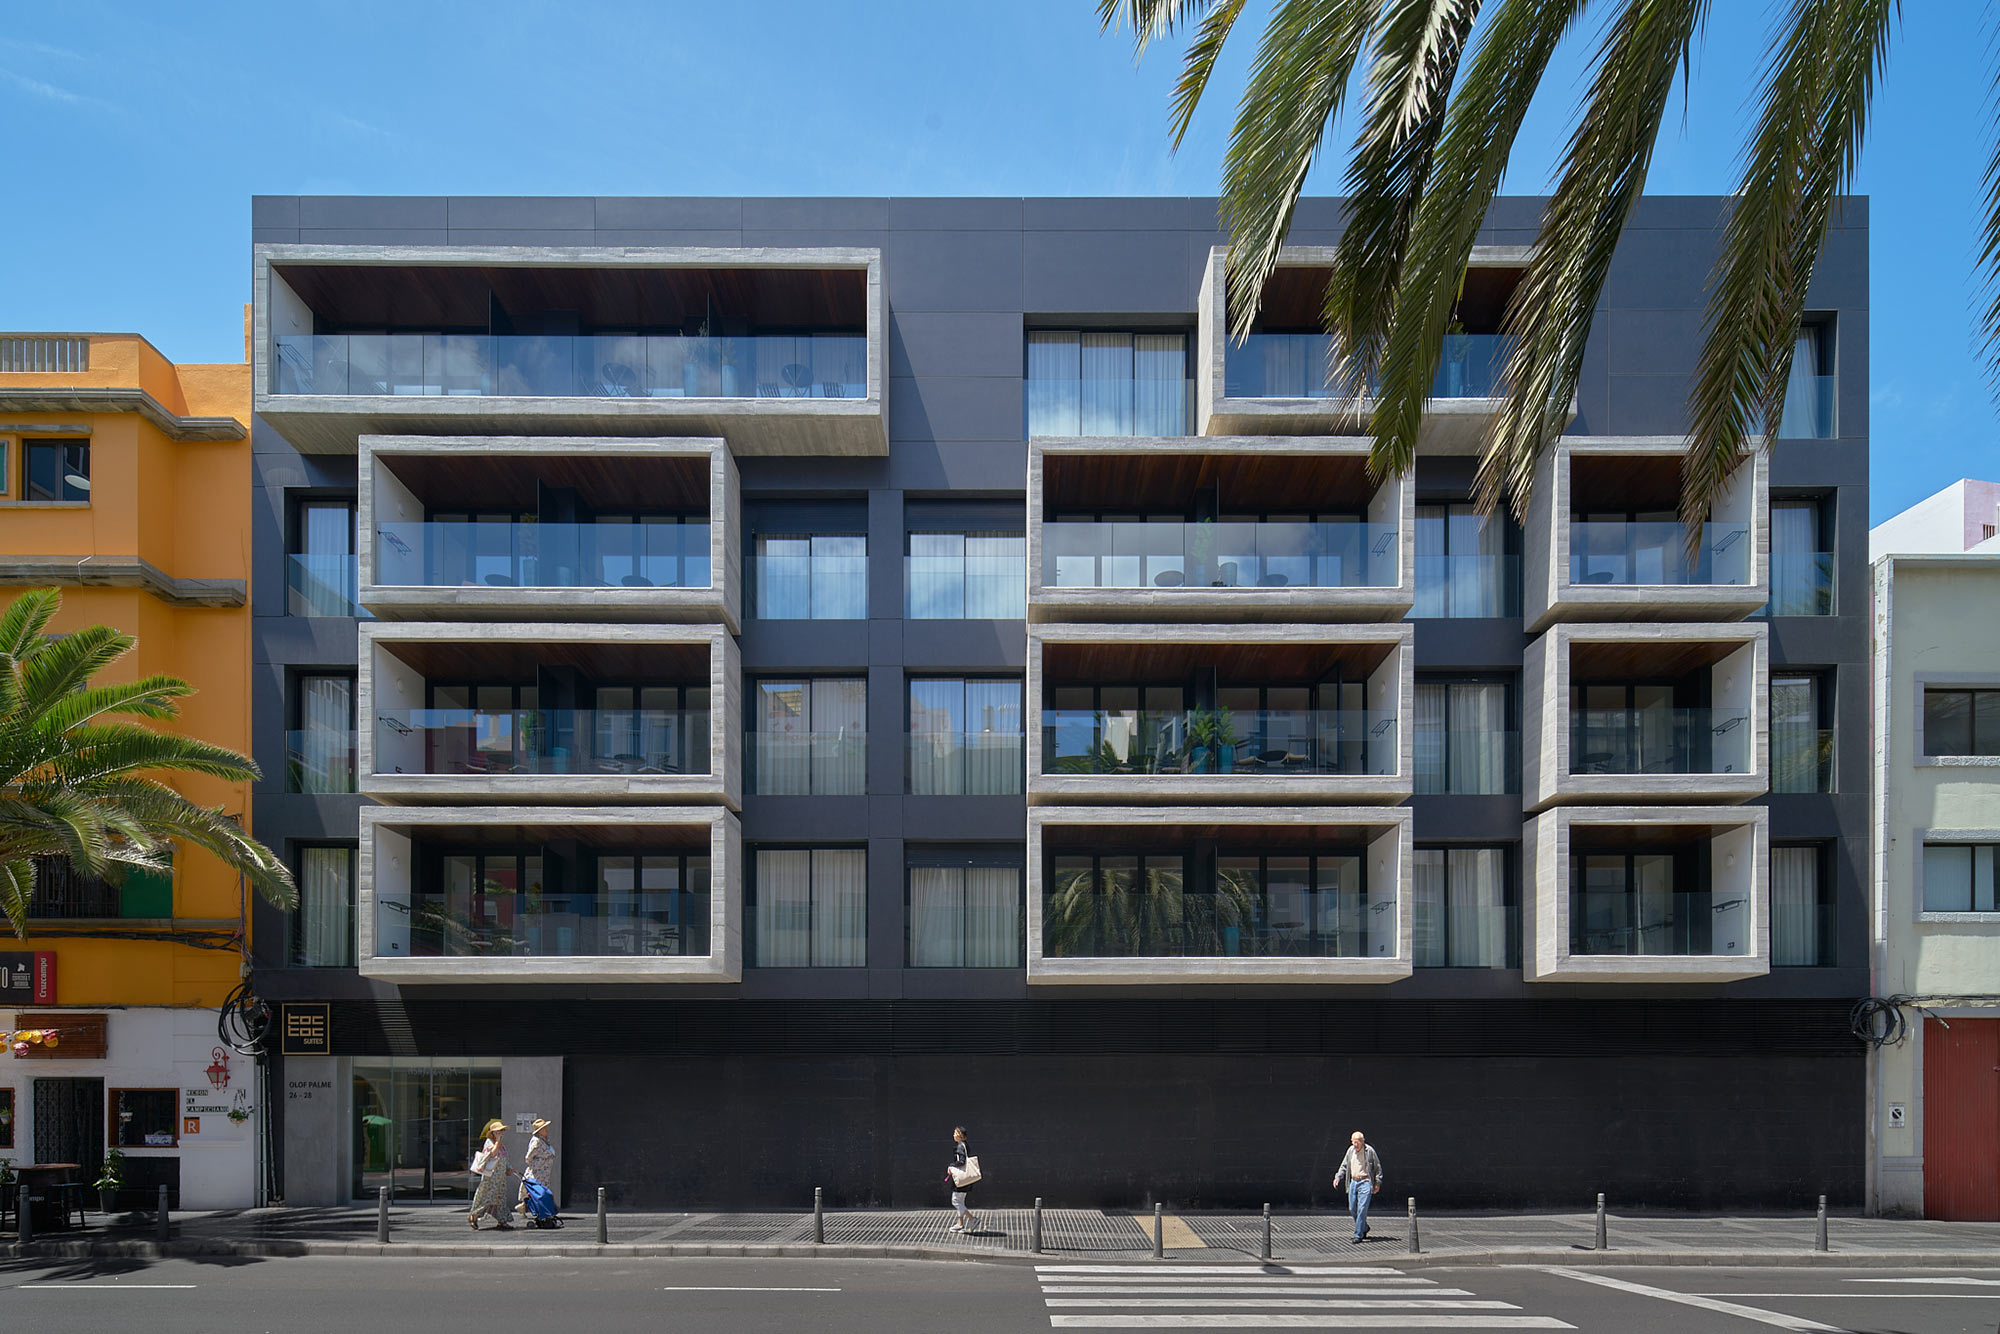 Image of Marina Guanarteme 18 in A modern and sustainable façade in A Coruña thanks to Dekton - Cosentino